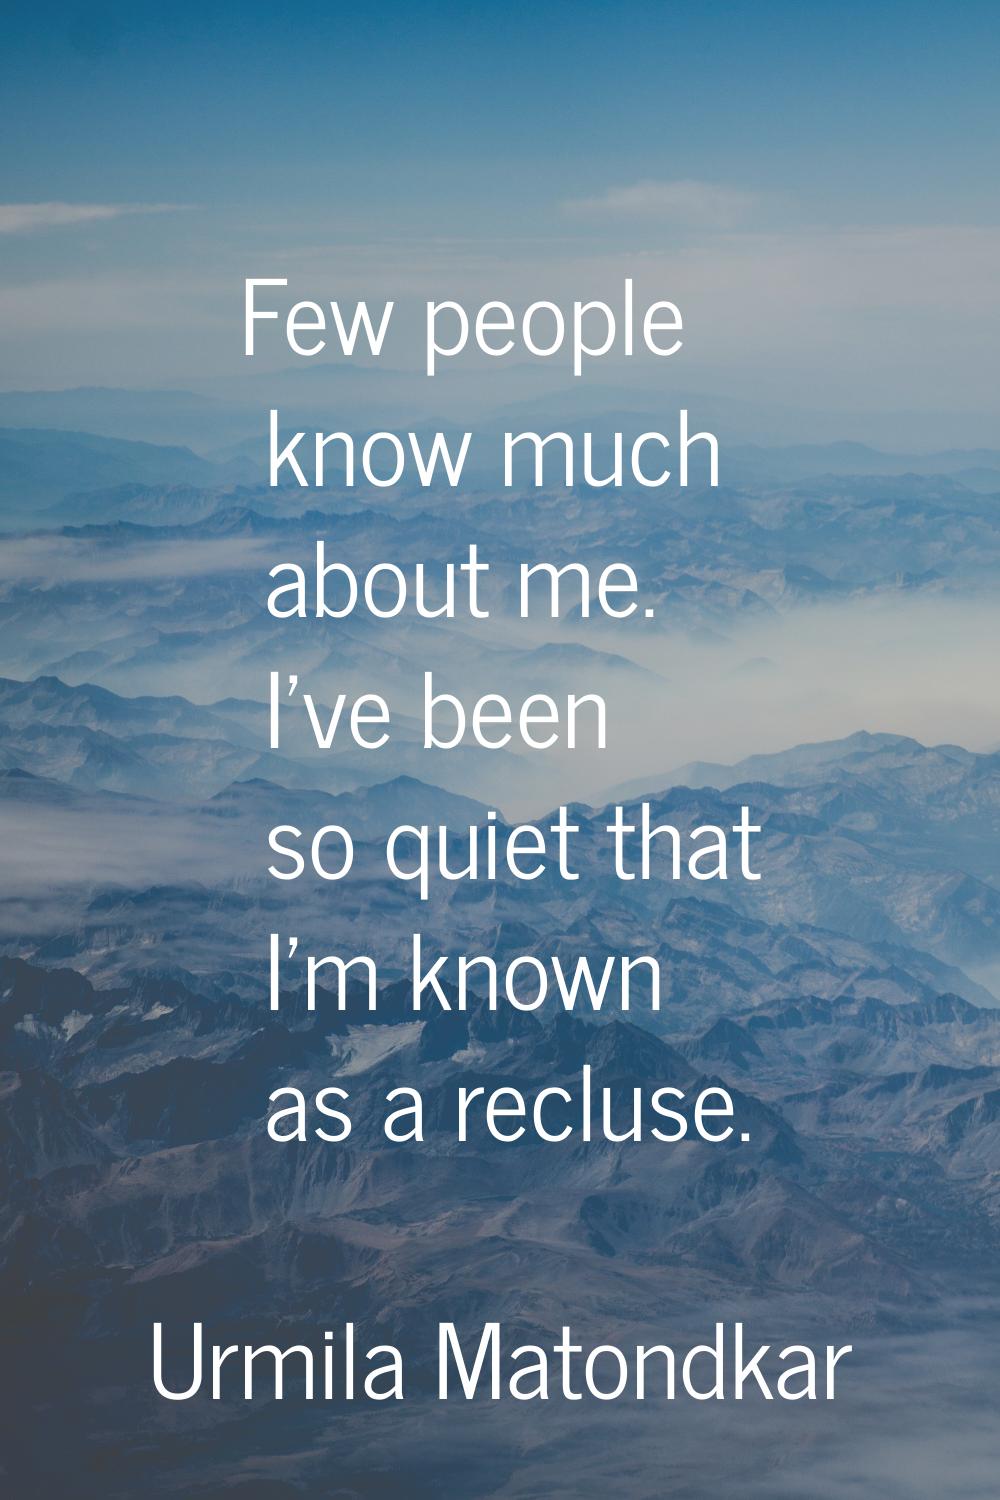 Few people know much about me. I've been so quiet that I'm known as a recluse.